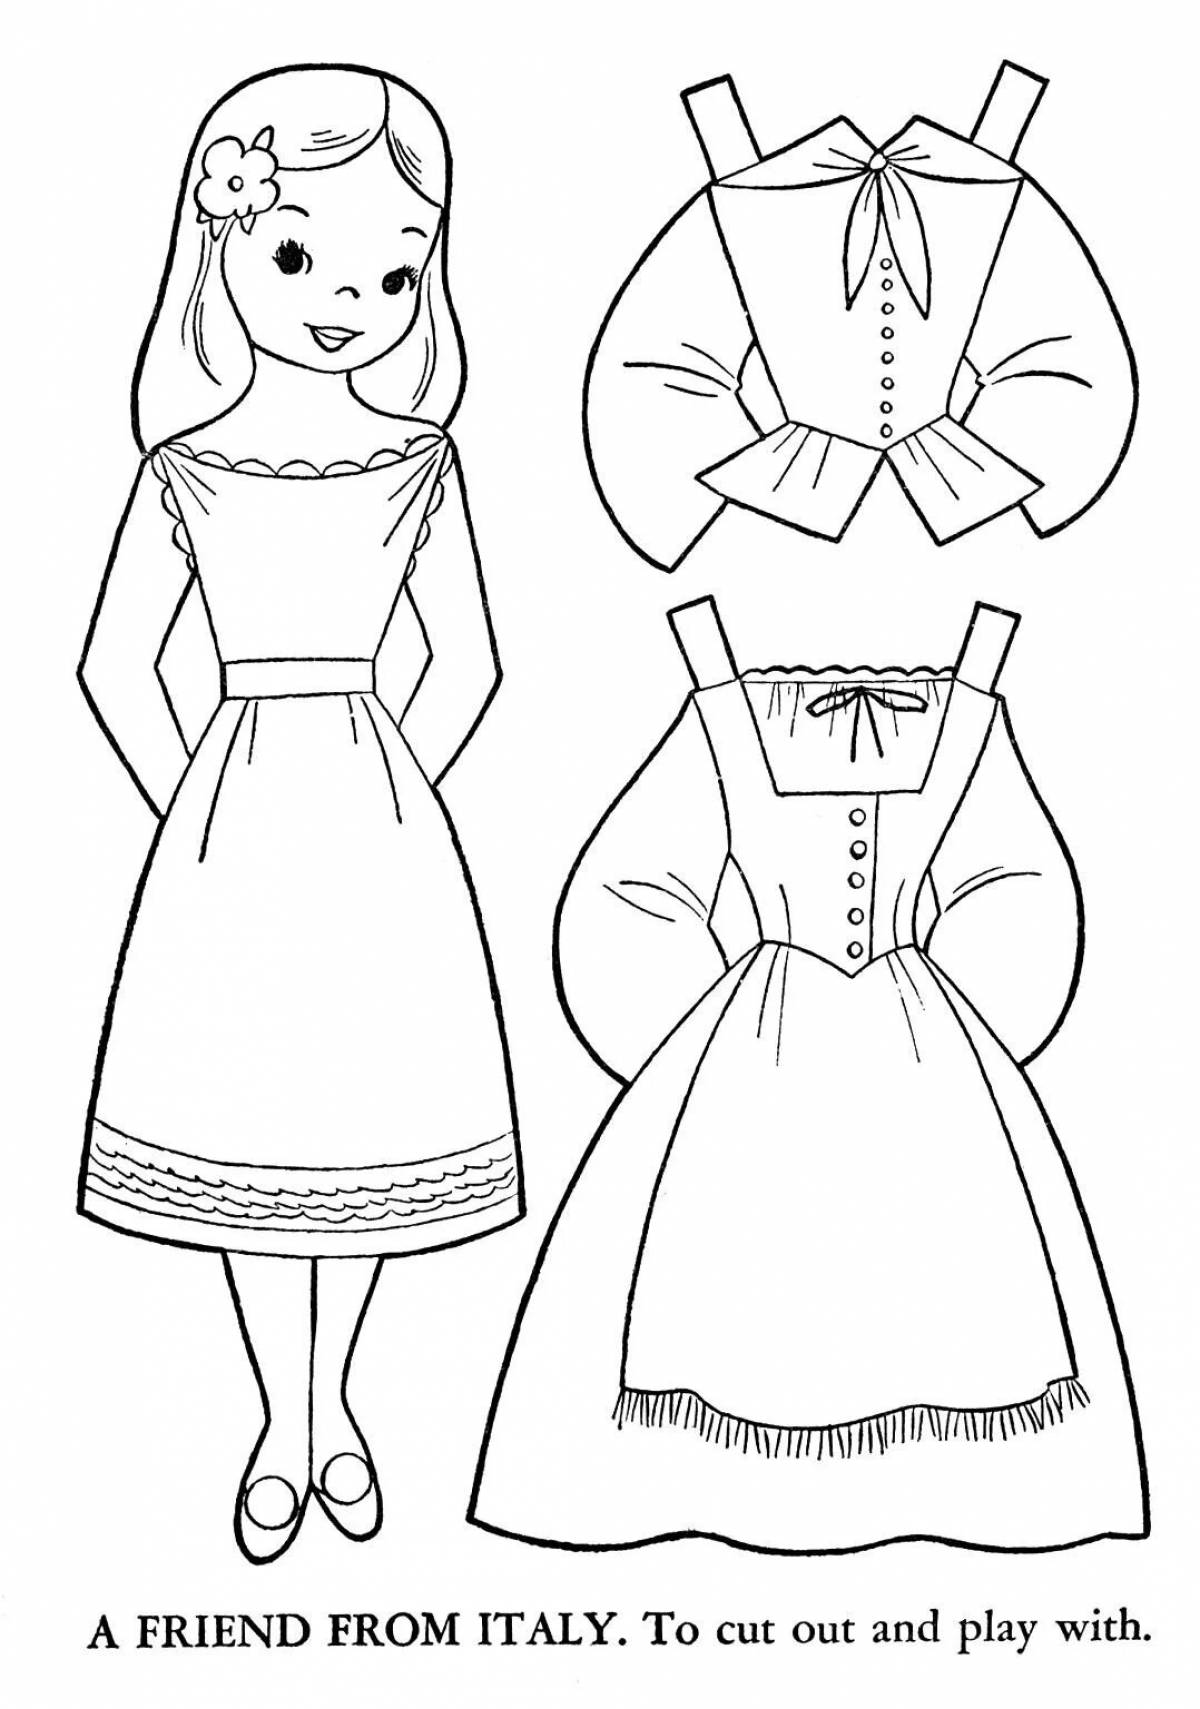 Coloring book with colorful doll clothes